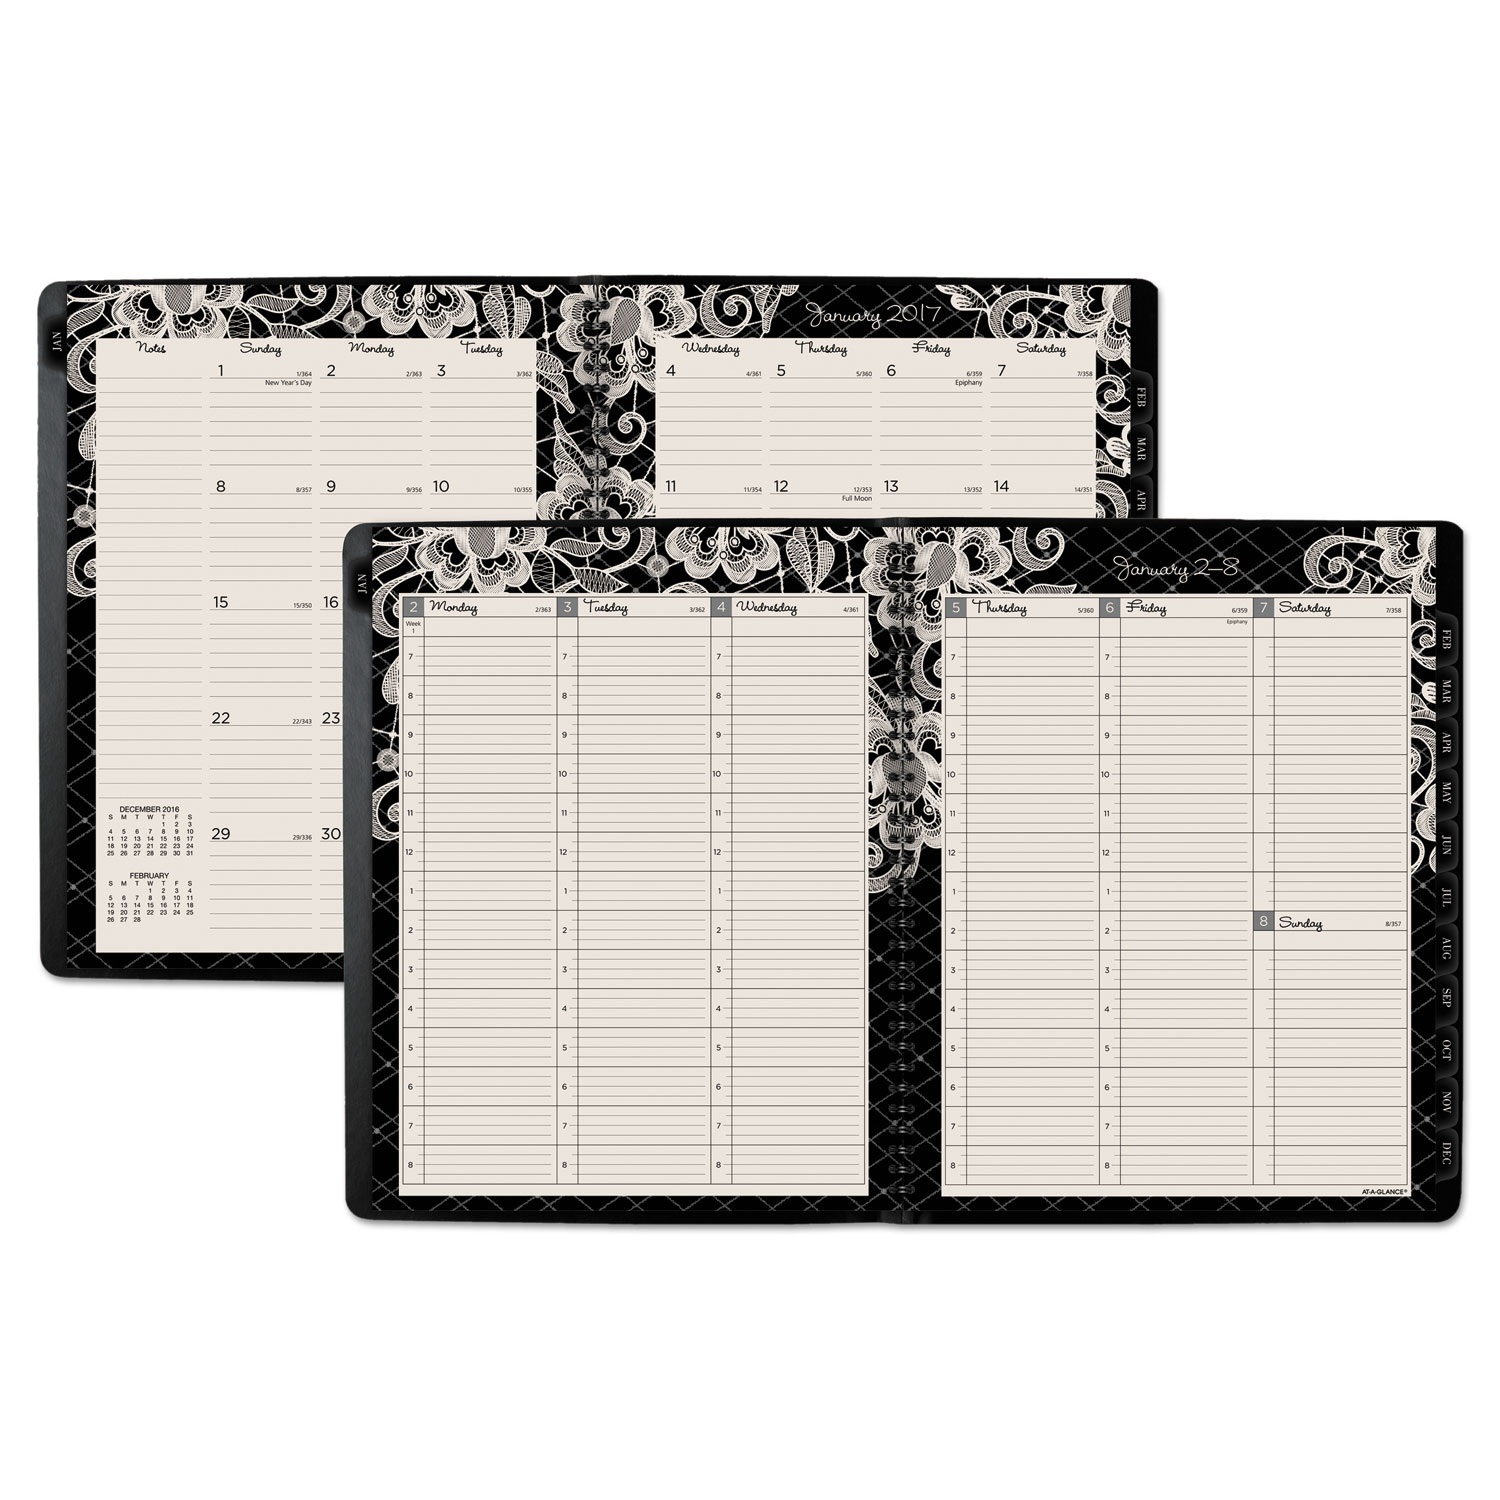 Lacey Professional Weekly/Monthly Appointment Book, 9 1/4 x 11 3/8, 2018-2019